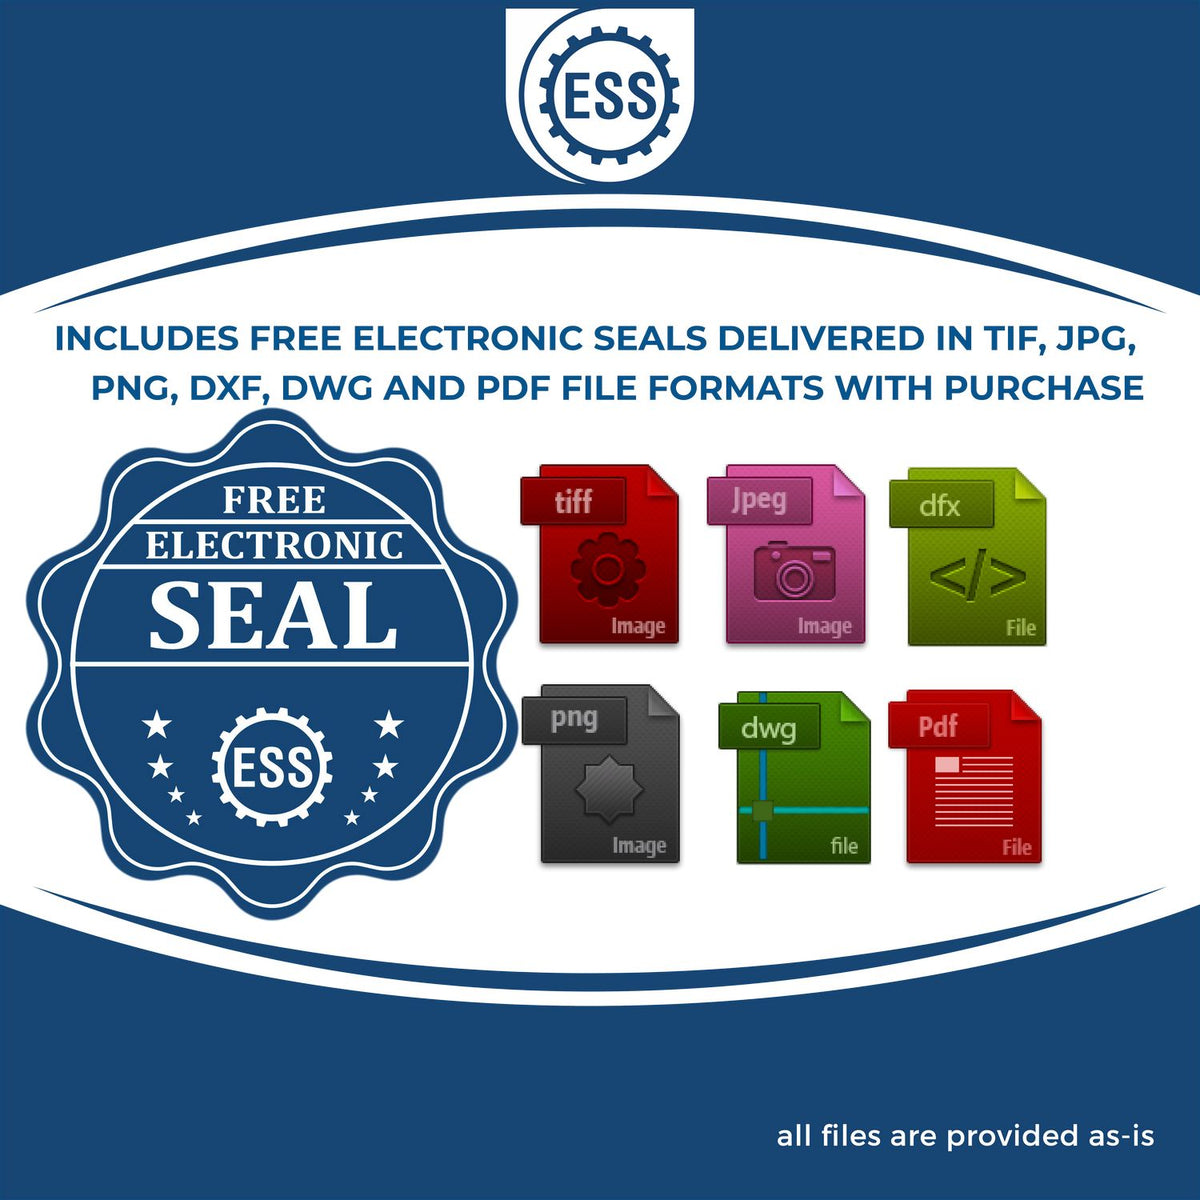 An infographic for the free electronic seal for the Wooden Handle Texas State Seal Notary Public Stamp illustrating the different file type icons such as DXF, DWG, TIF, JPG and PNG.